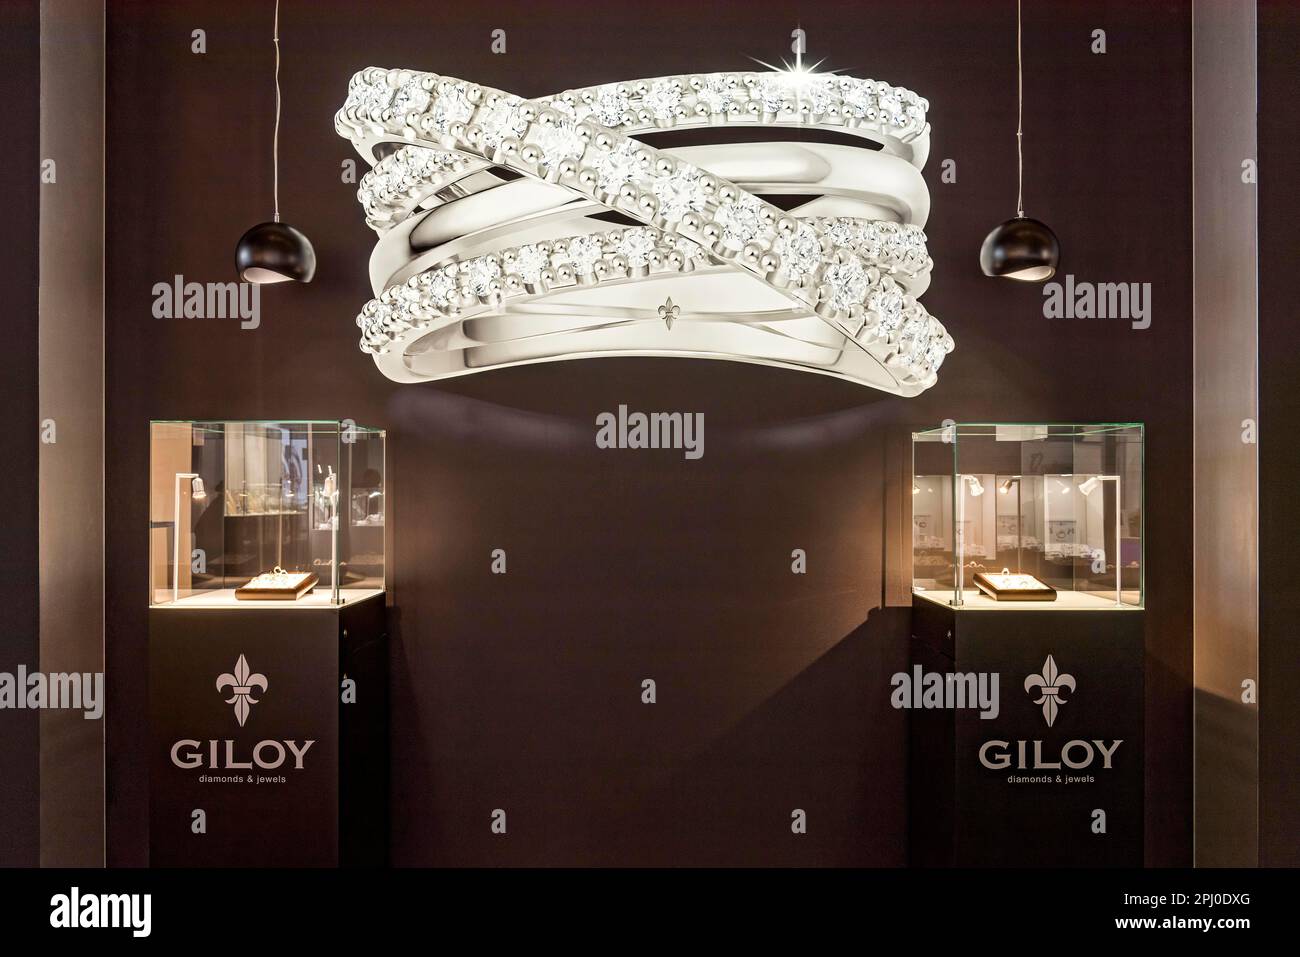 Showcases at photo wall with high quality jewellery, exhibition stand jeweller Giloy diamonds & jewels, Inhorgenta, trade fair for jewellery watches Stock Photo